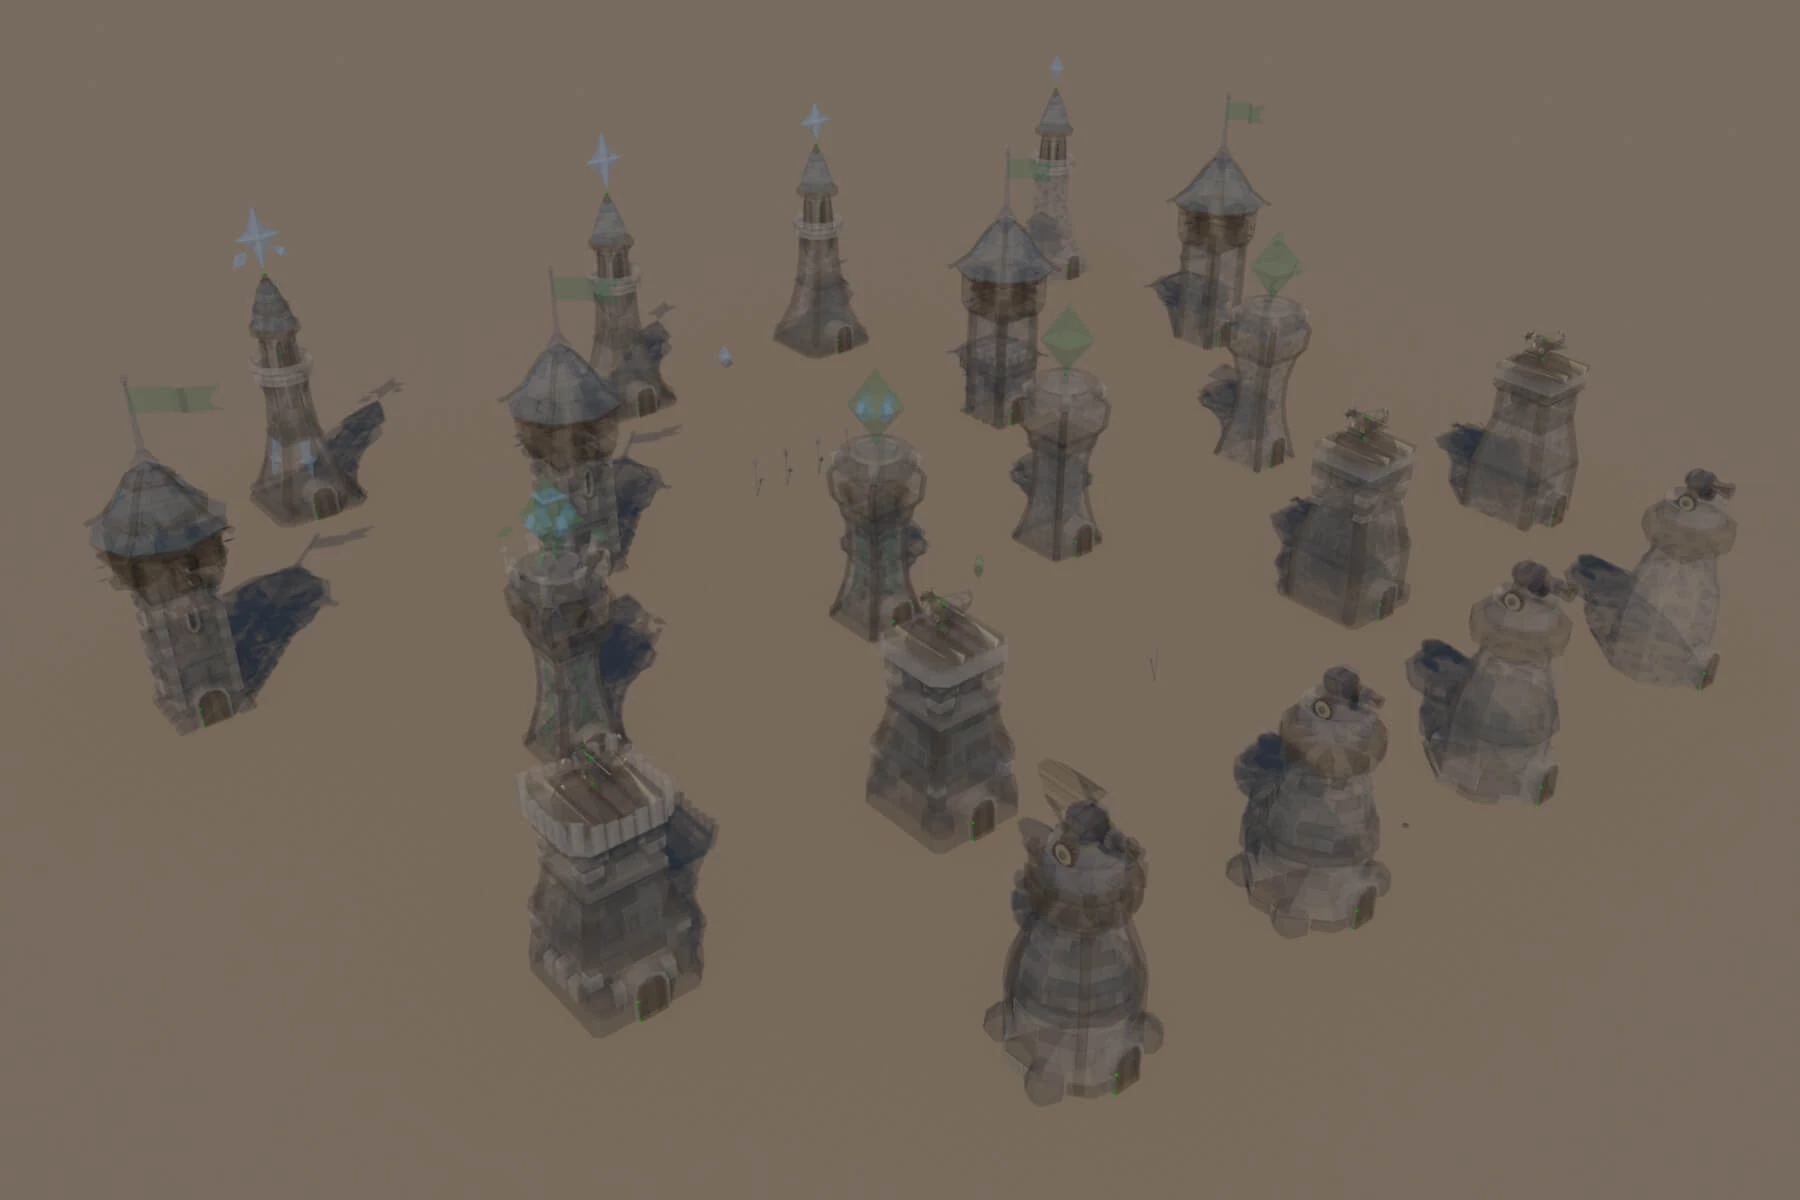 Defense Tower 3D Low Poly by Free Game Assets (GUI, Sprite, Tilesets)